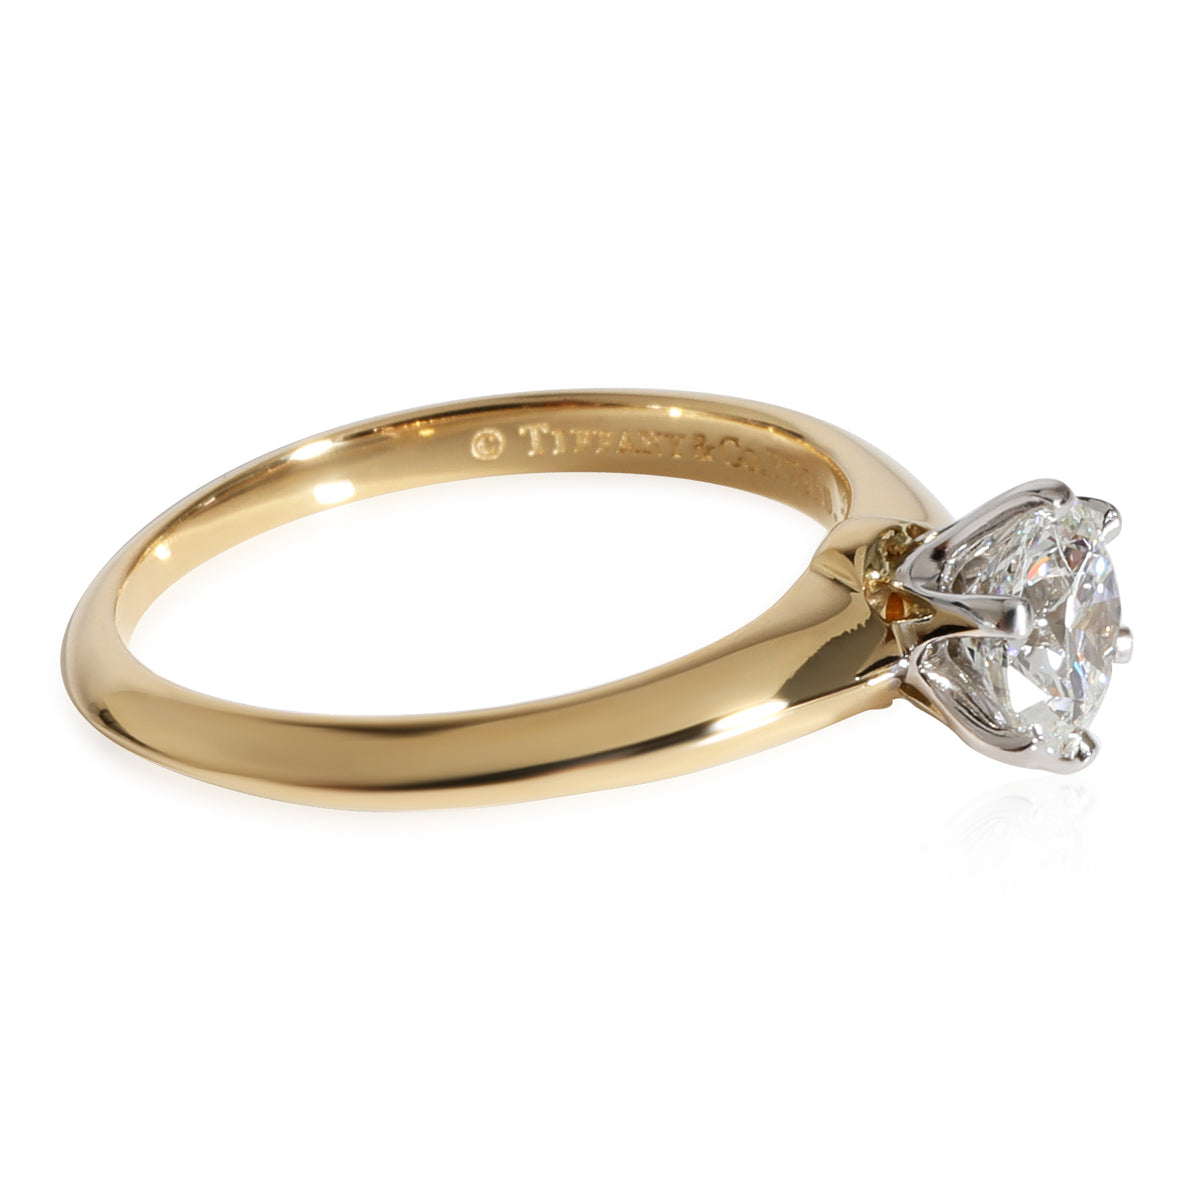 Tiffany & Co. Solitaire Ring in 18k Yellow Gold/Platinum 0.61 CTW